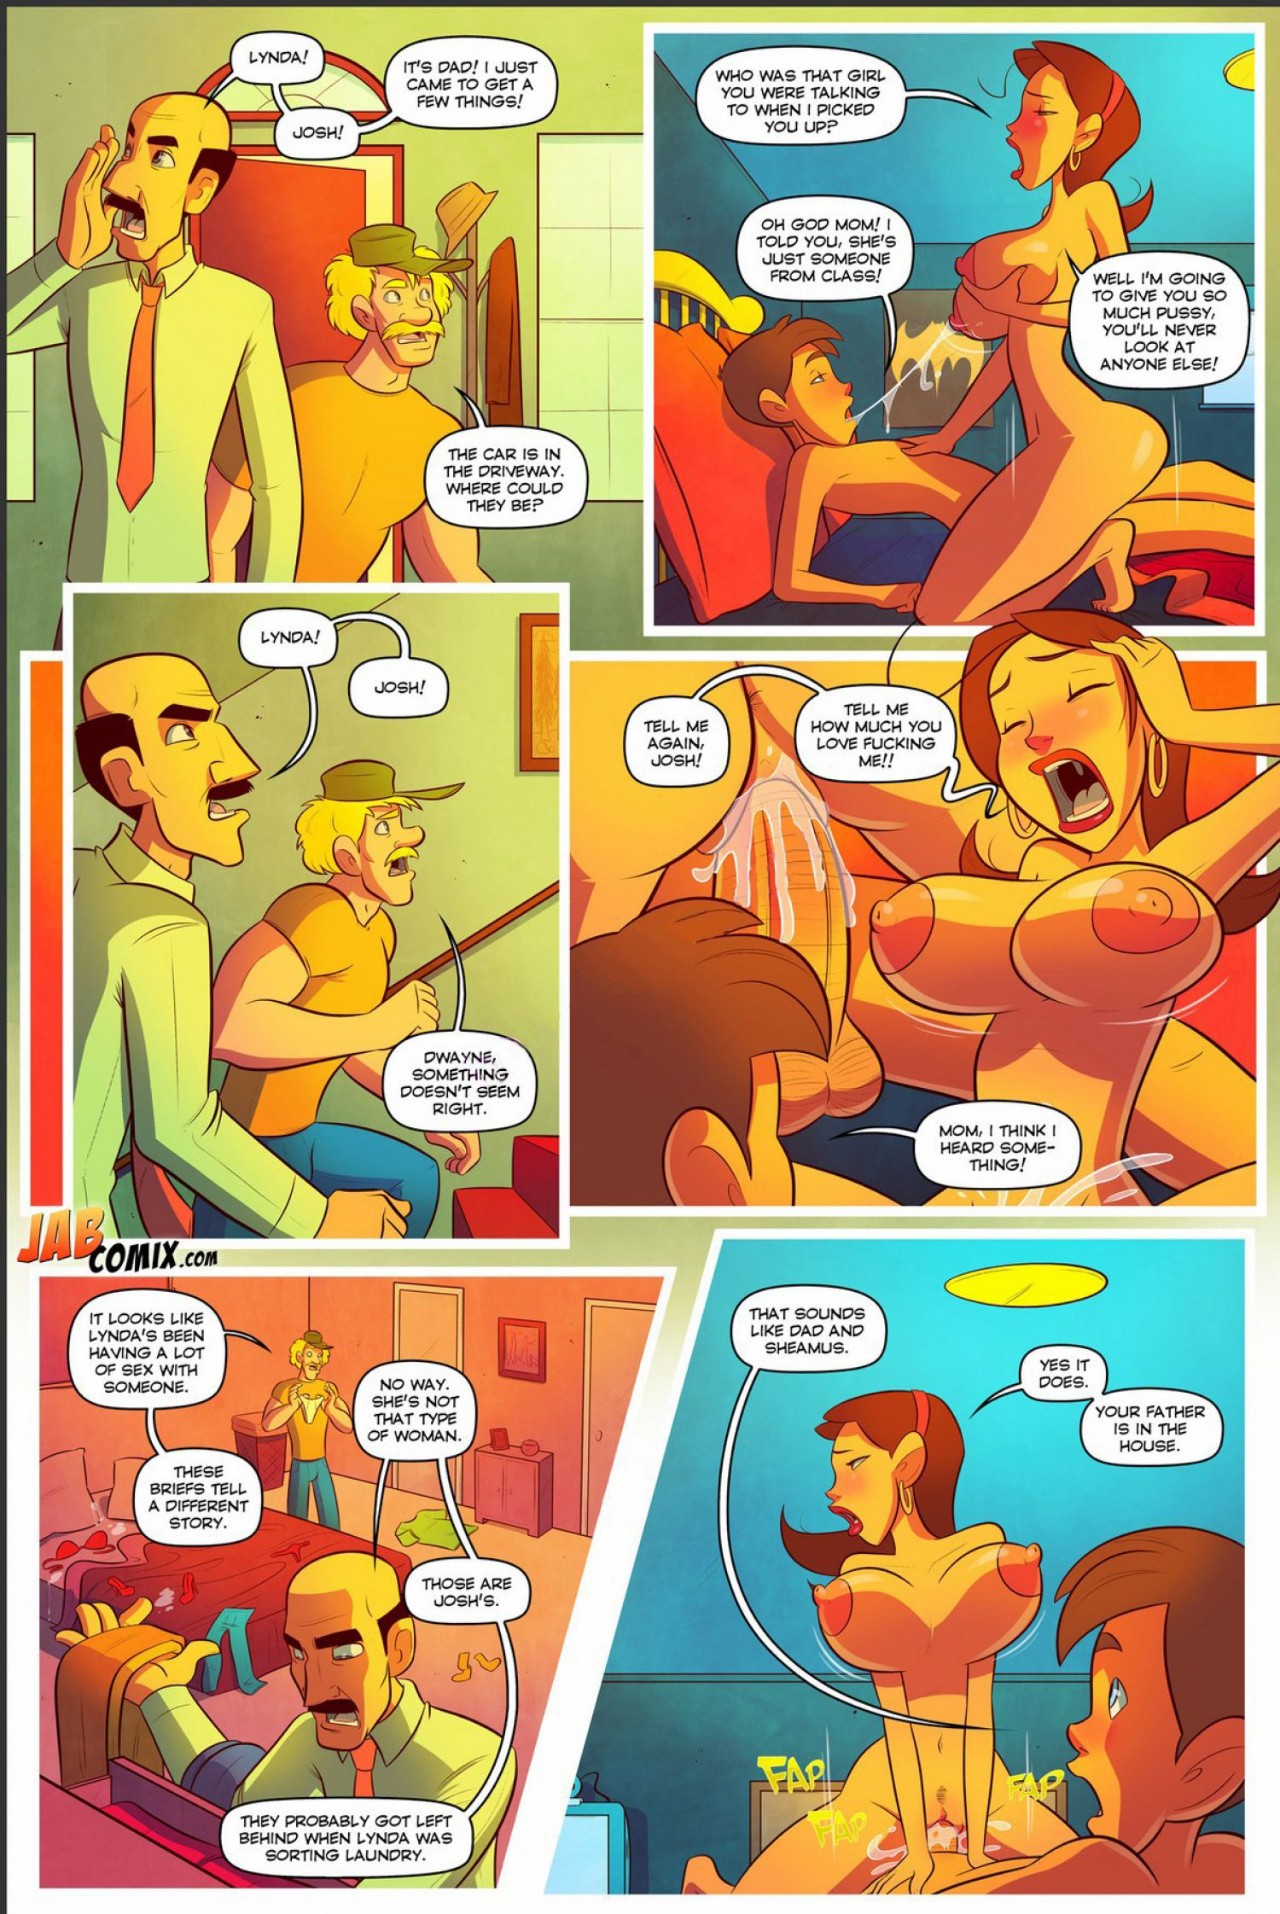 Keeping It Up With The Joneses Part 3 Porn Comic english 02